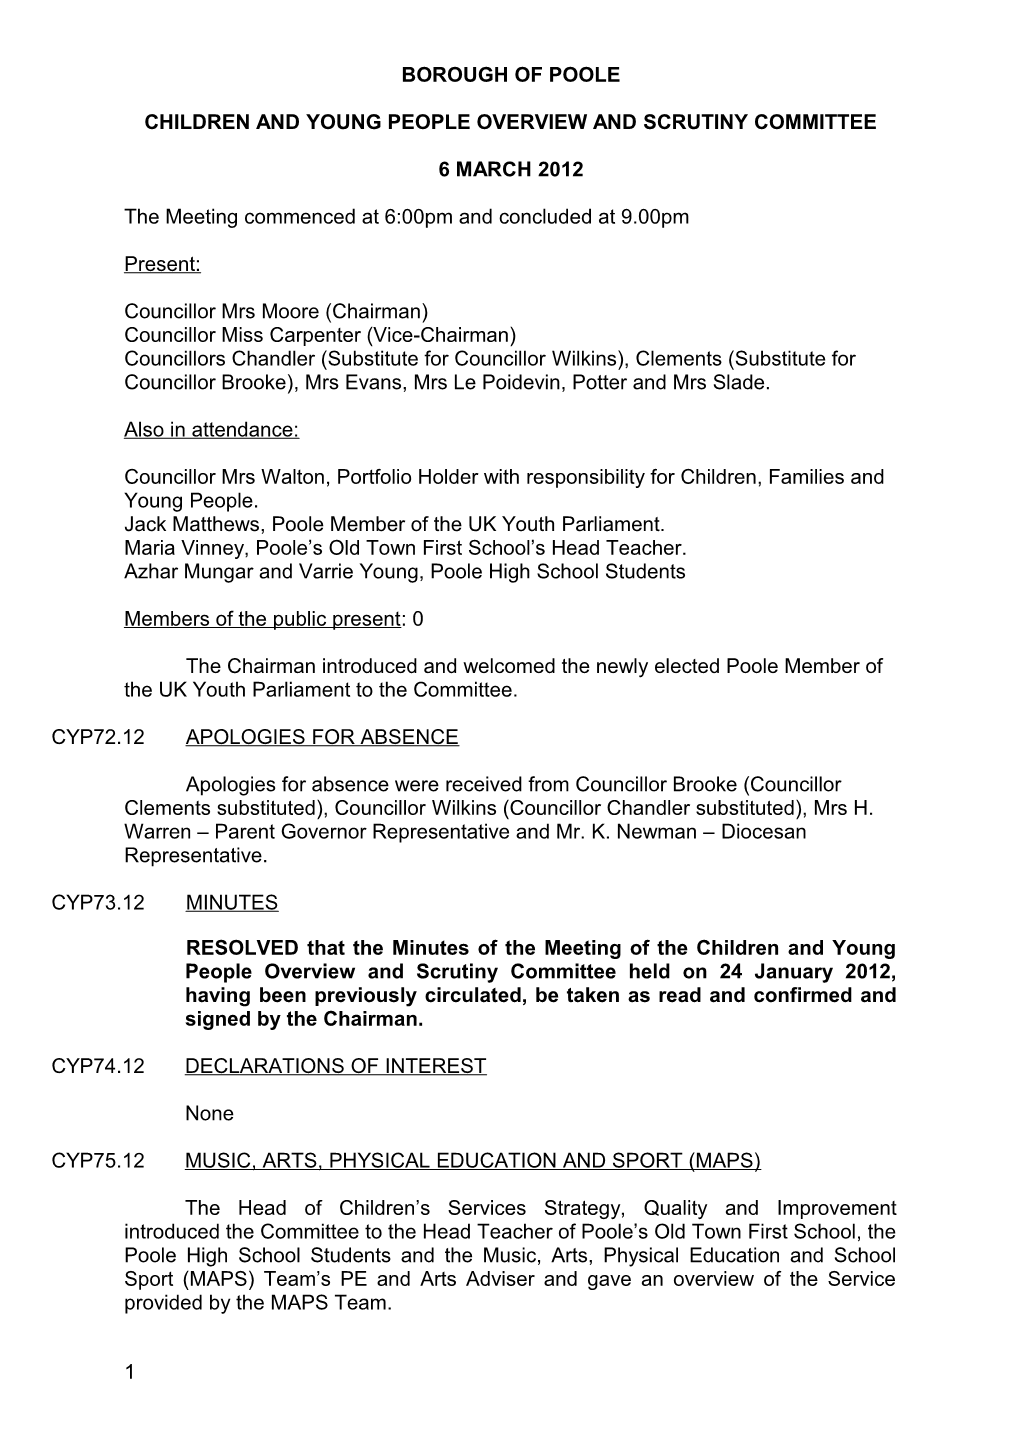 Agenda - Children and Young People Overview and Scrutiny Committee - 4 October 2011